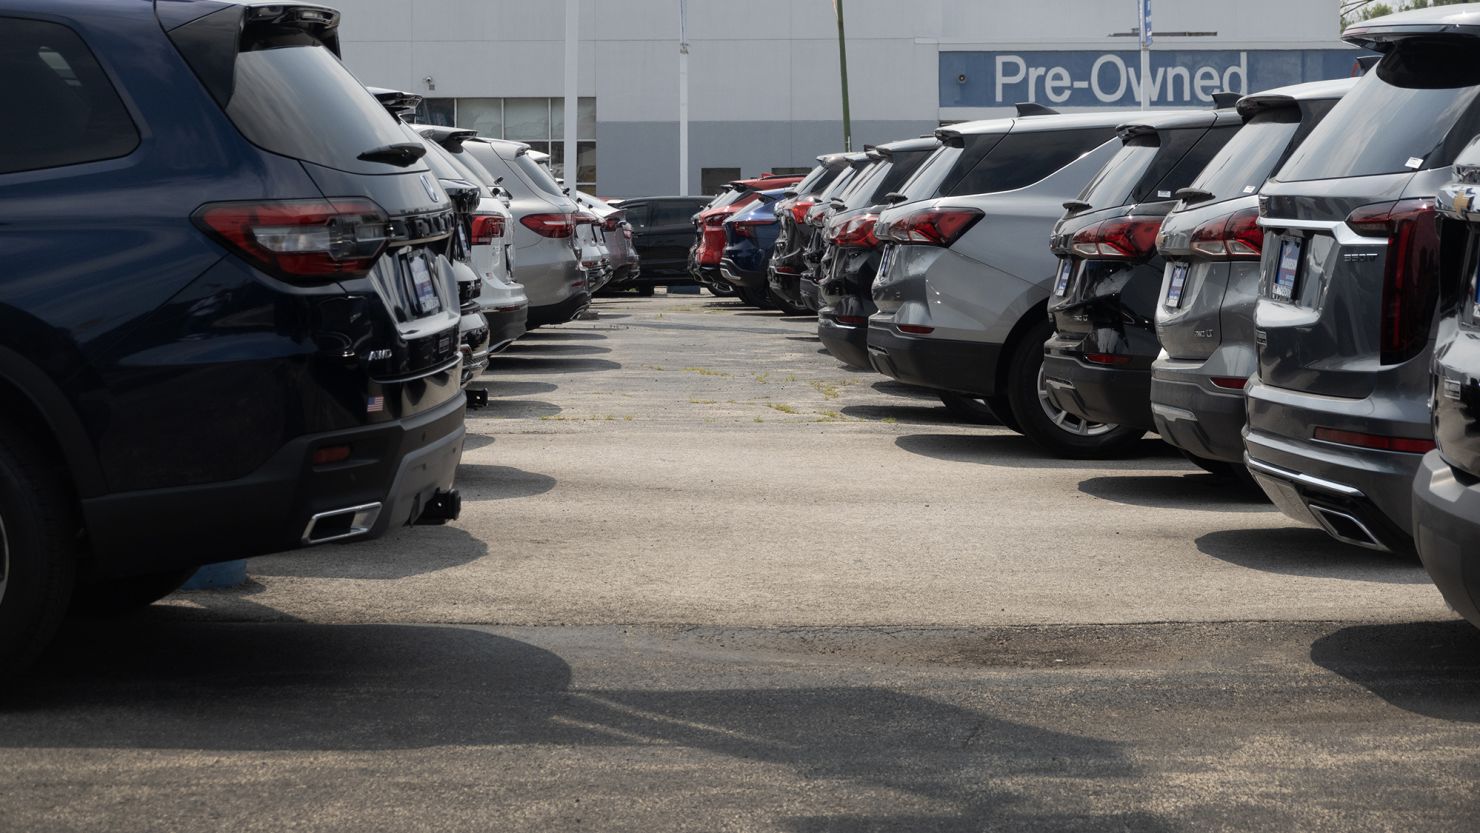 Cars sit on a Chevrolet dealership's lot on June 20, 2024 in Chicago, Illinois. A cyber attack on CDK Global, a software provider that helps dealerships manage sales and service, has crippled the workflow at approximately 15,000 dealerships across the United States and Canada.